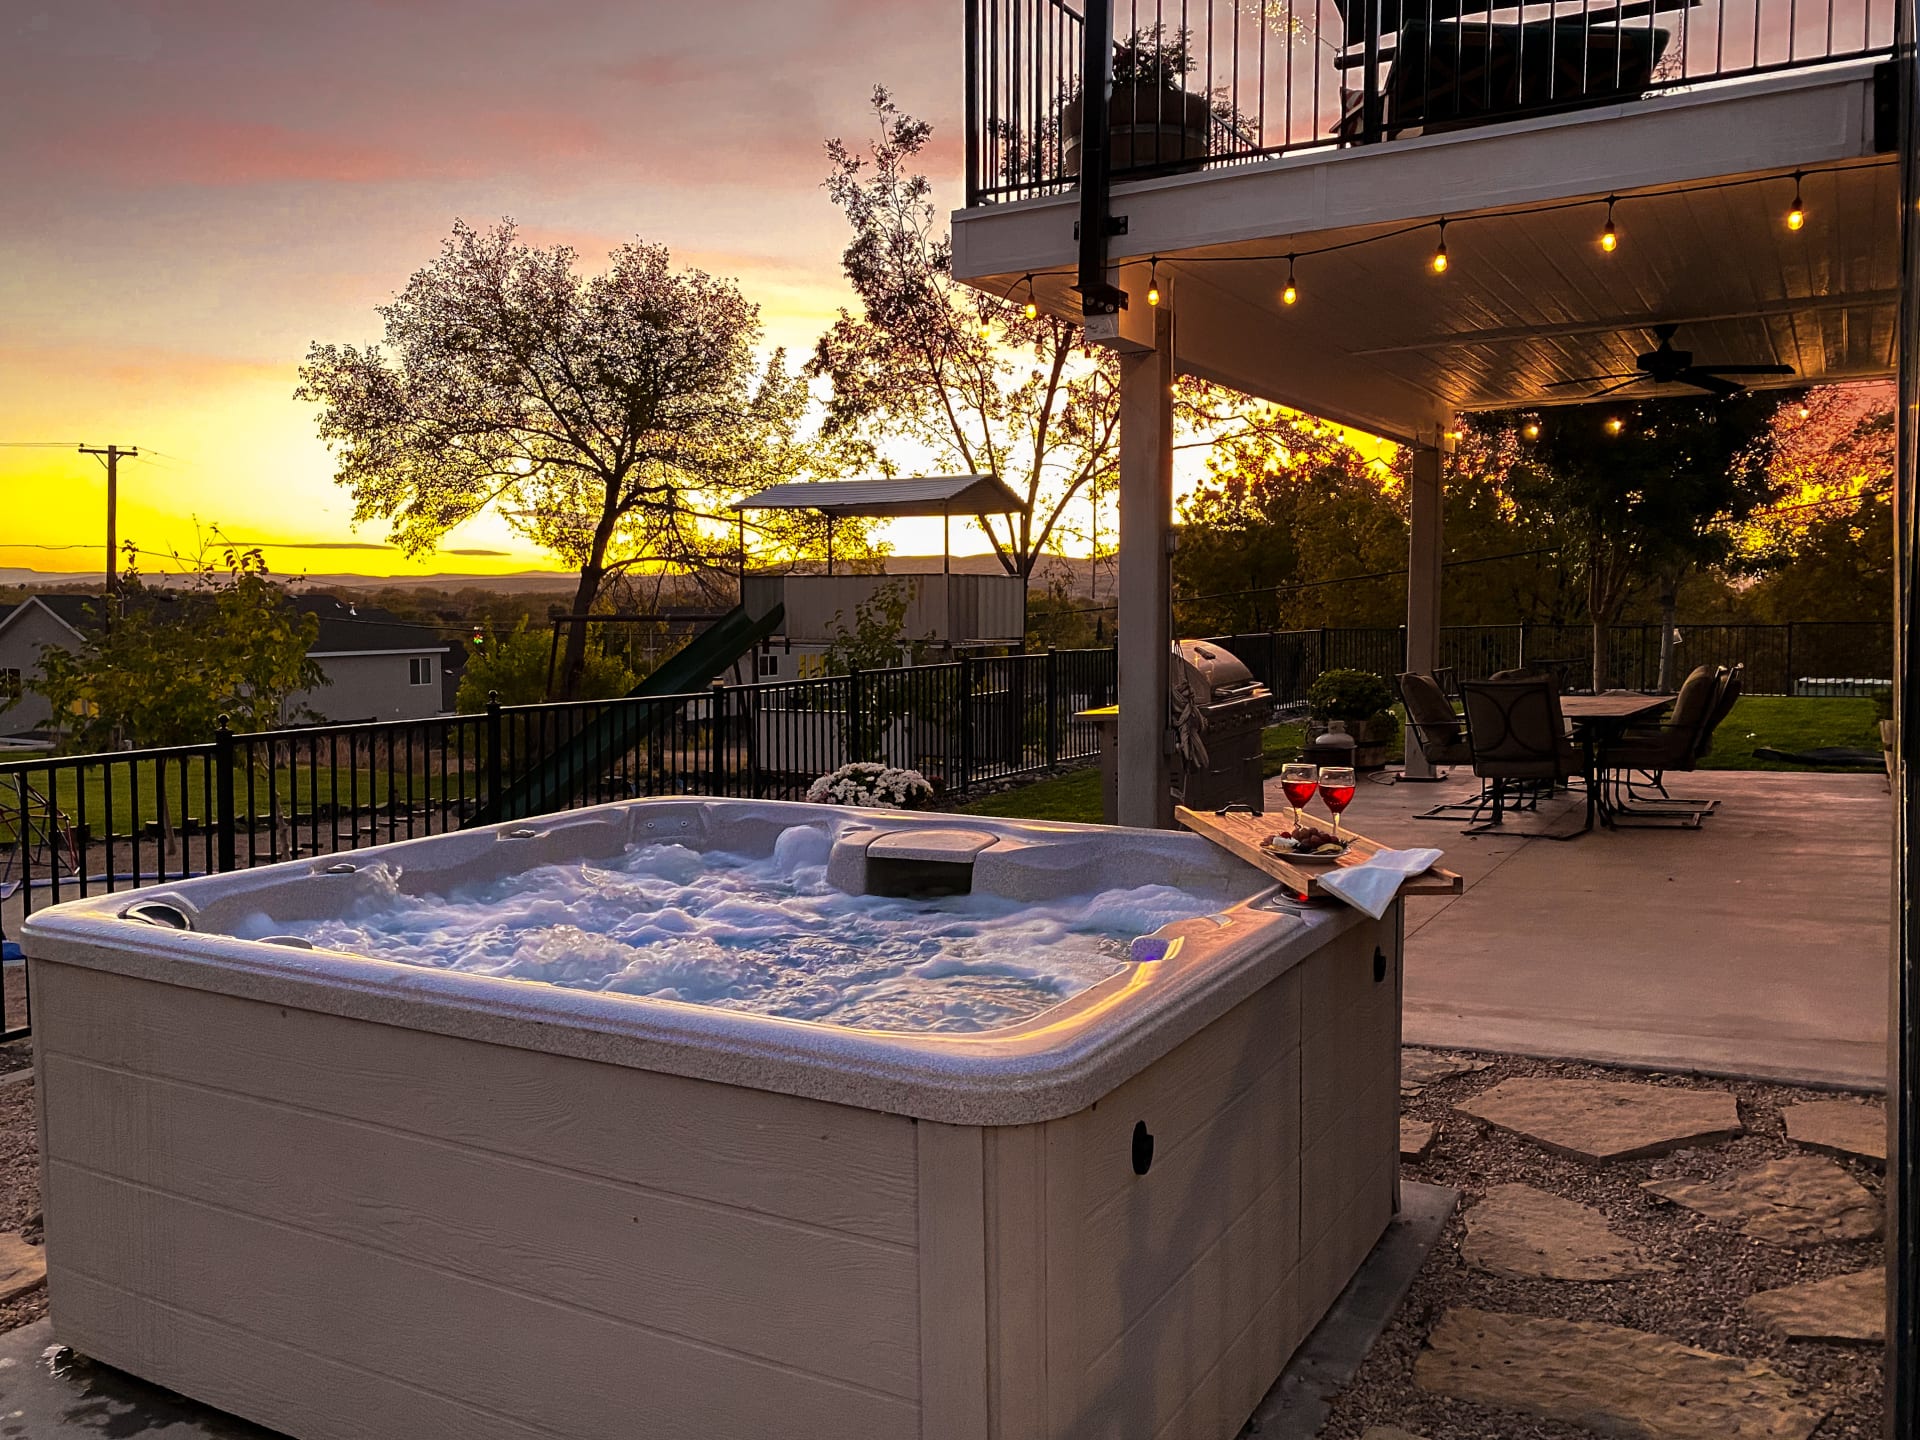 Southwestern sunsets are the just amazing.  Stargazing or watching sunsets from the hot tub or balcony is one of the highlights of The Loft. 